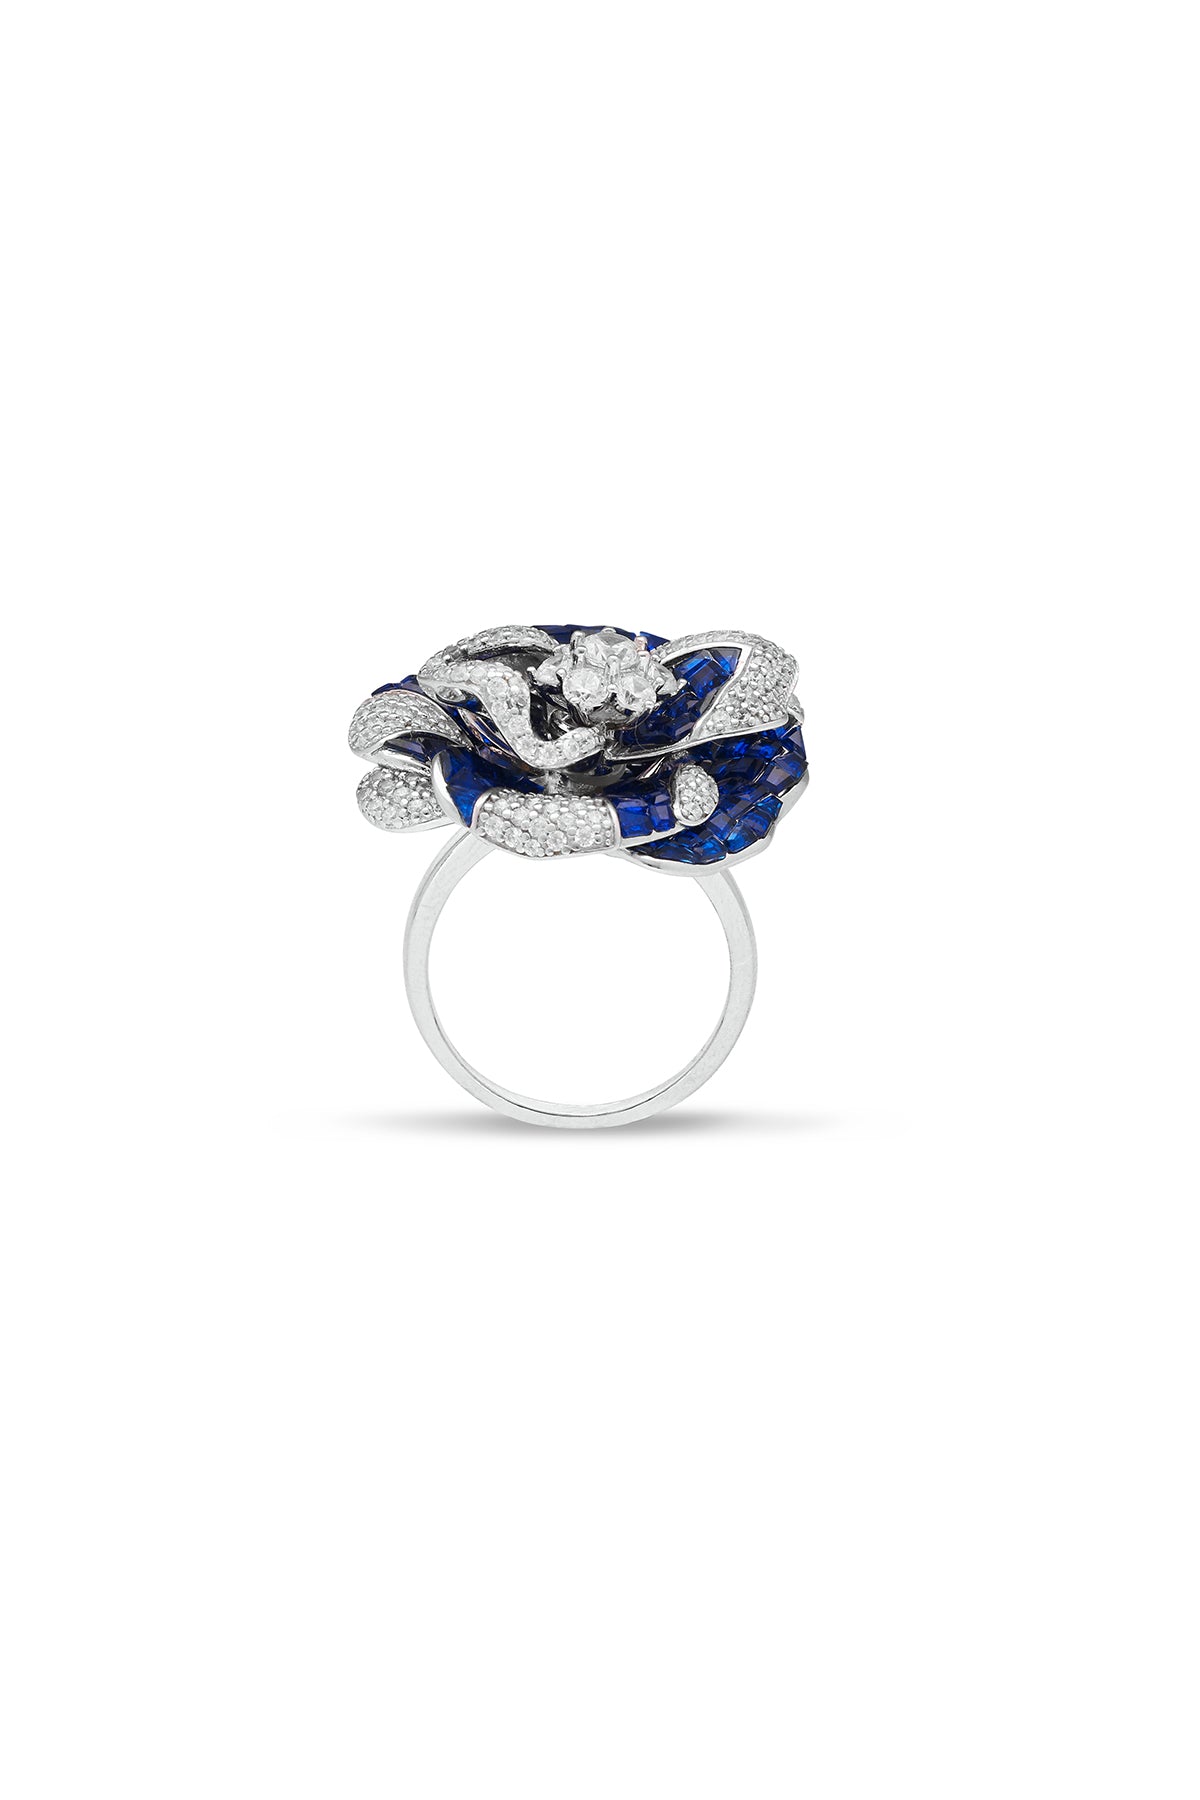 Wildflower Whispers Statement Ring